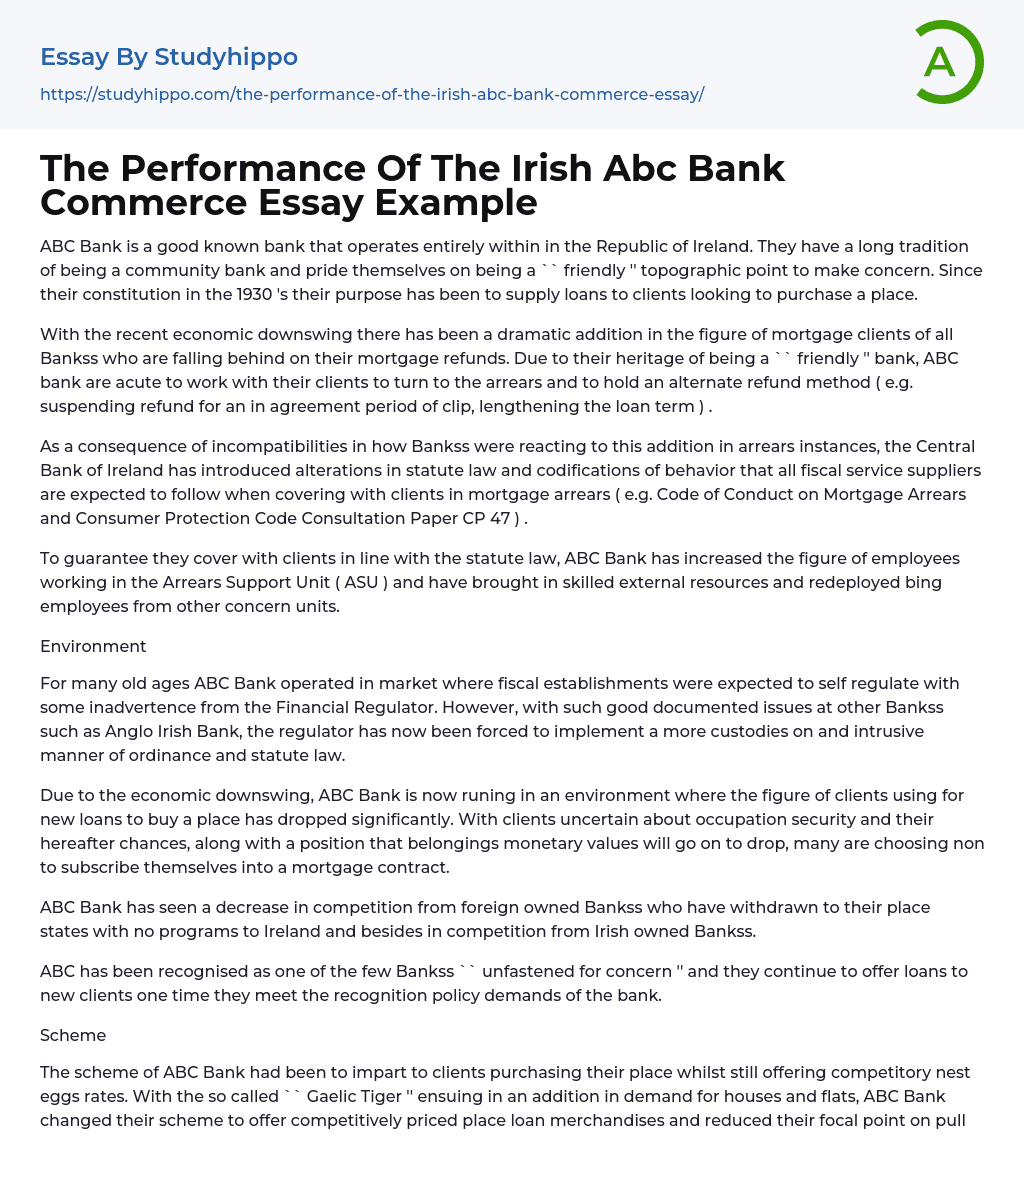 The Performance Of The Irish Abc Bank Commerce Essay Example